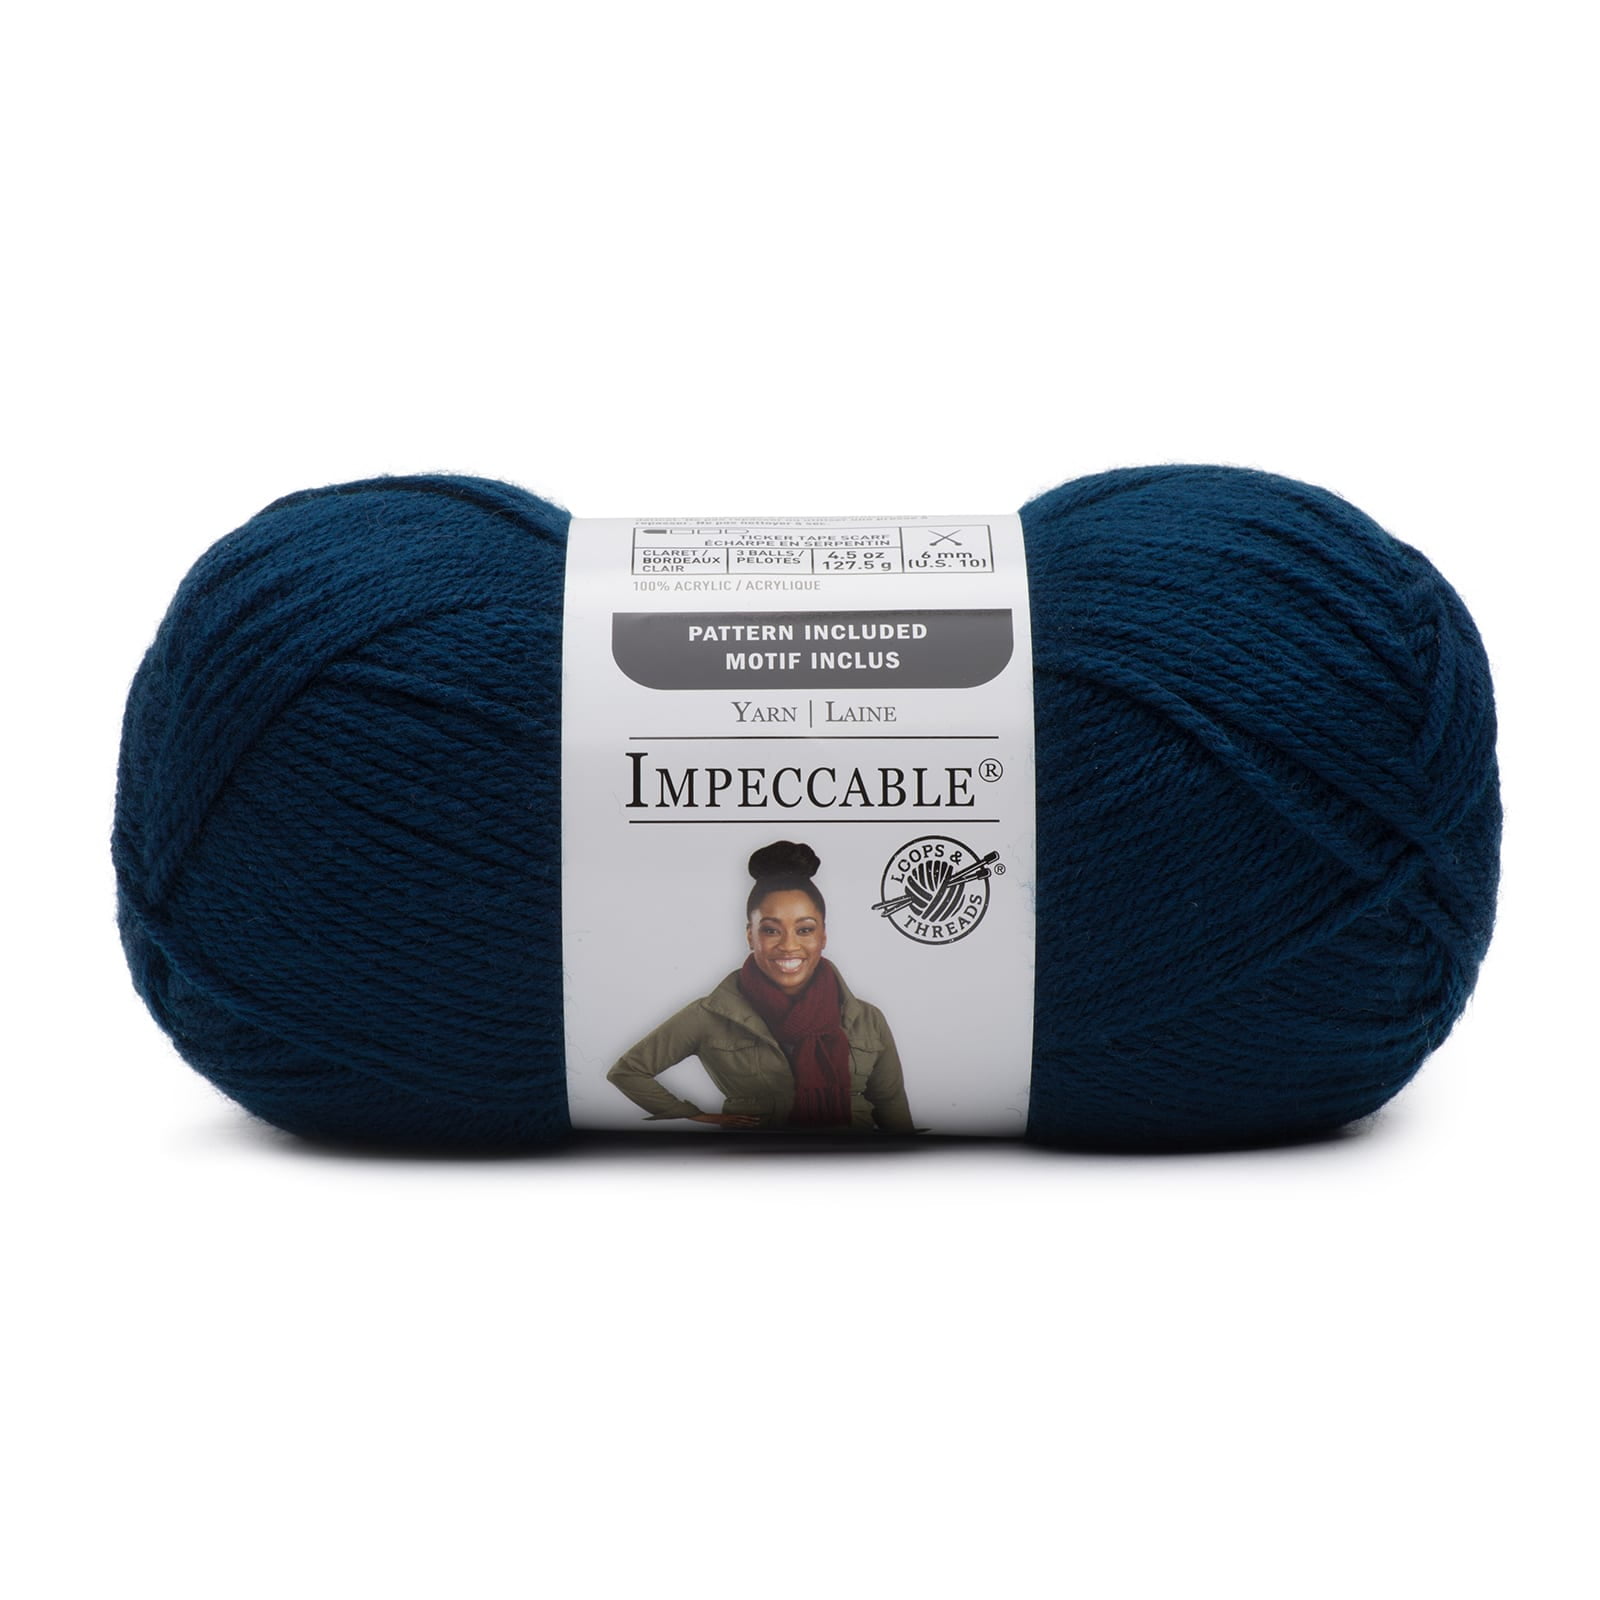 Loops & Threads Impeccable Yarn 4.5 oz. One Ball - Soft Rose Pink